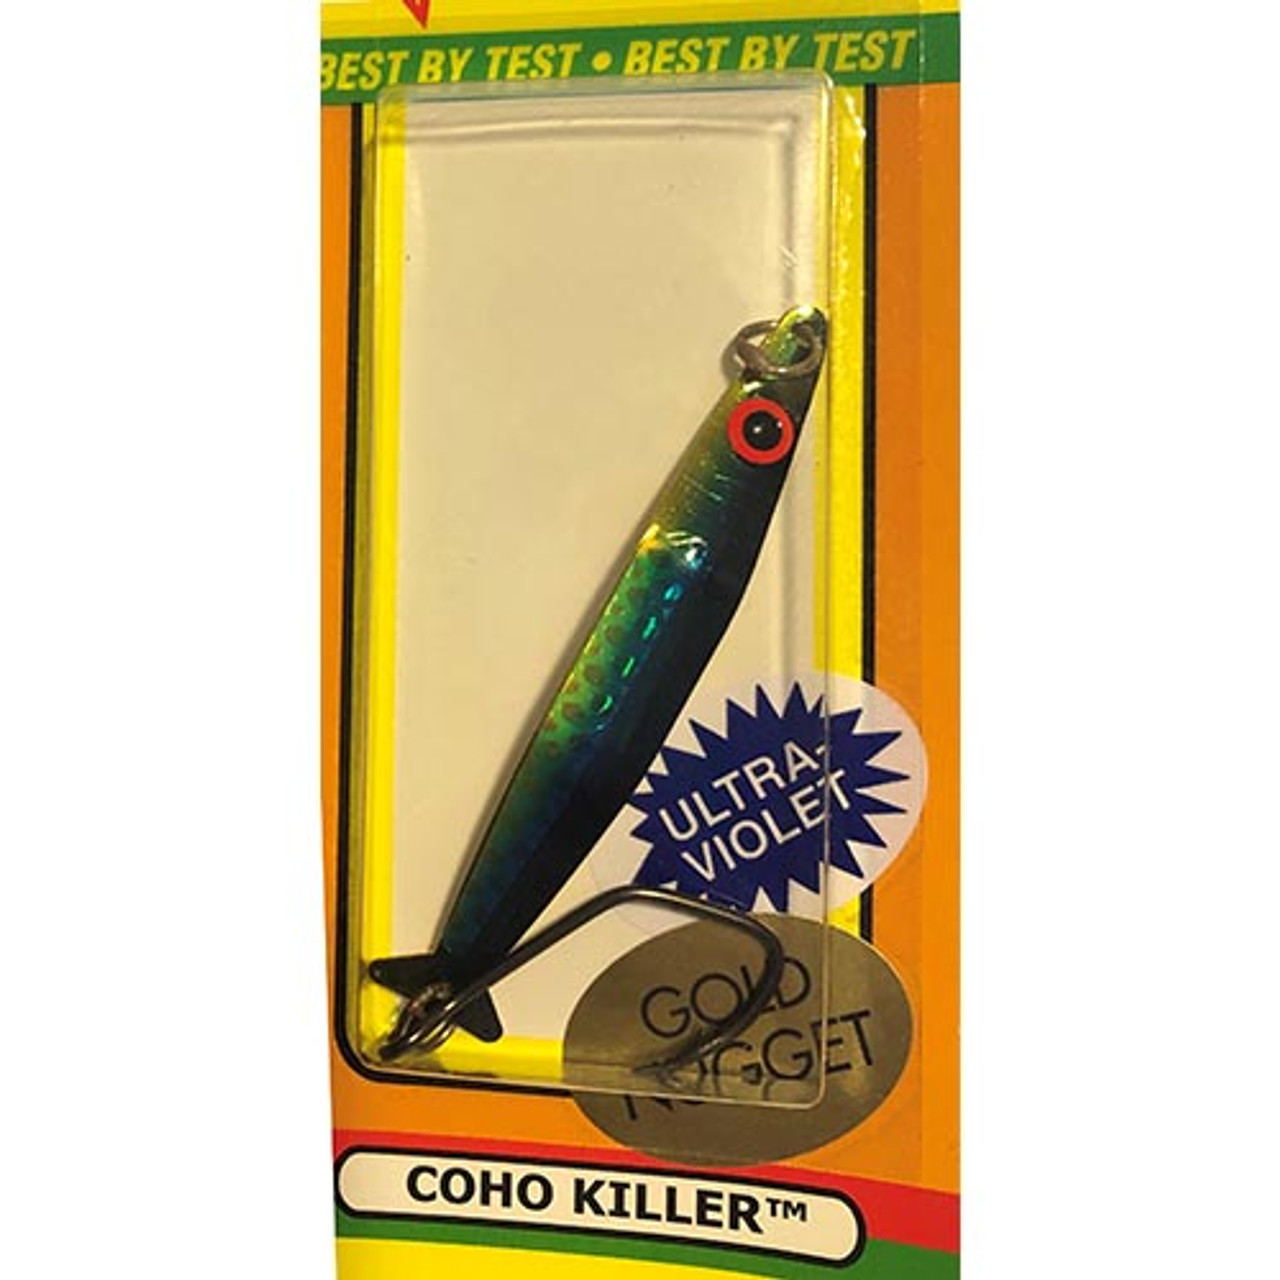 https://cdn11.bigcommerce.com/s-juamt7rae6/images/stencil/1280x1280/products/3862/4867/Coho-Killer-Gold-Herring-Aid__43259.1626804072.jpg?c=1?imbypass=on